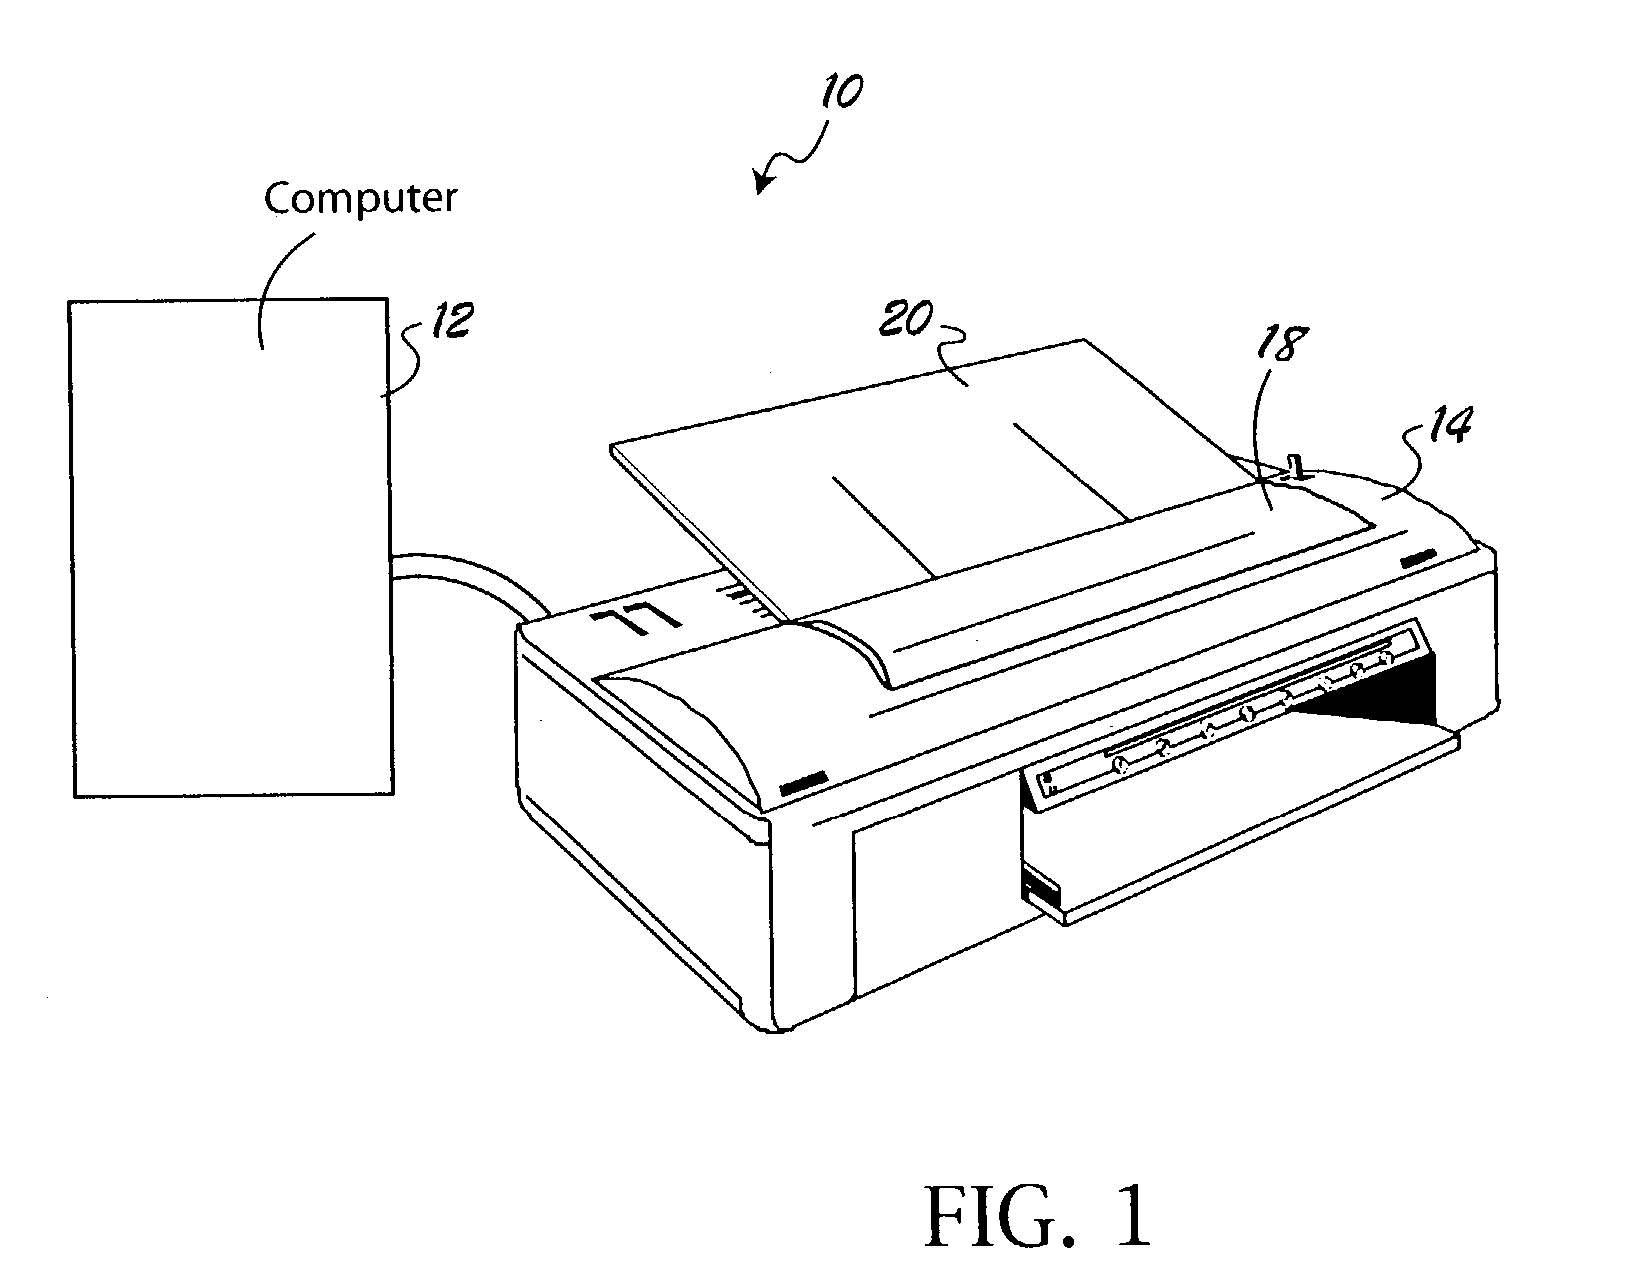 Conductive component manufacturing process employing an ink jet printer